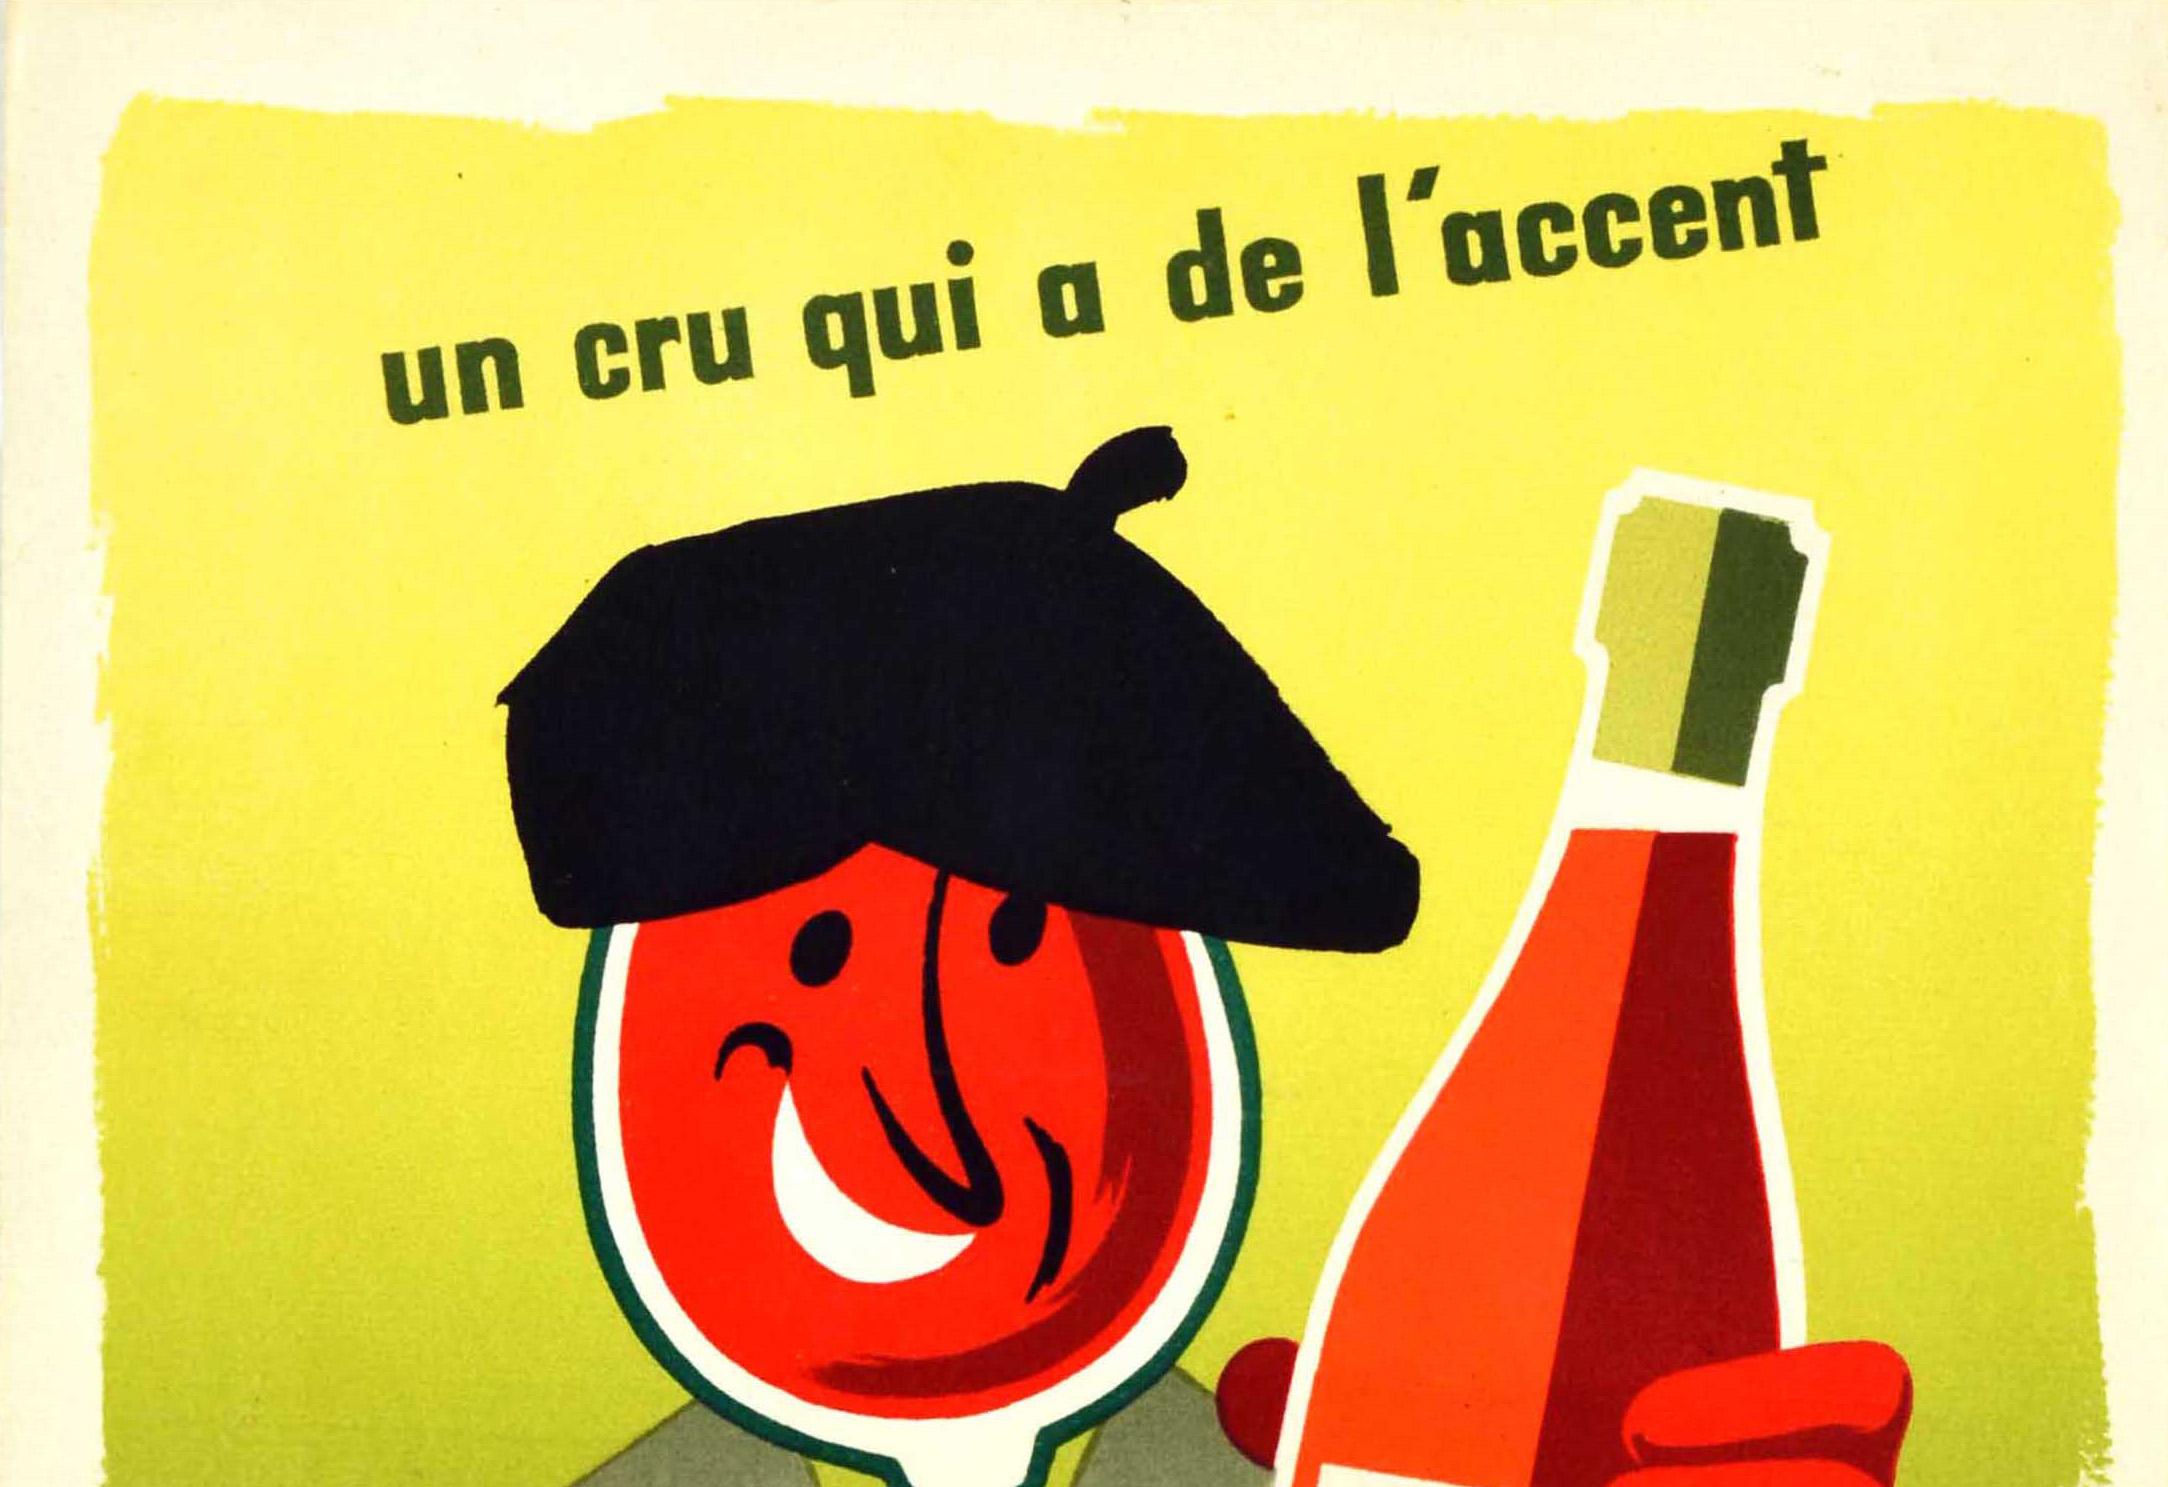 French Original Vintage Drink Poster Corbieres AOC Wine France Languedoc Roussillon For Sale